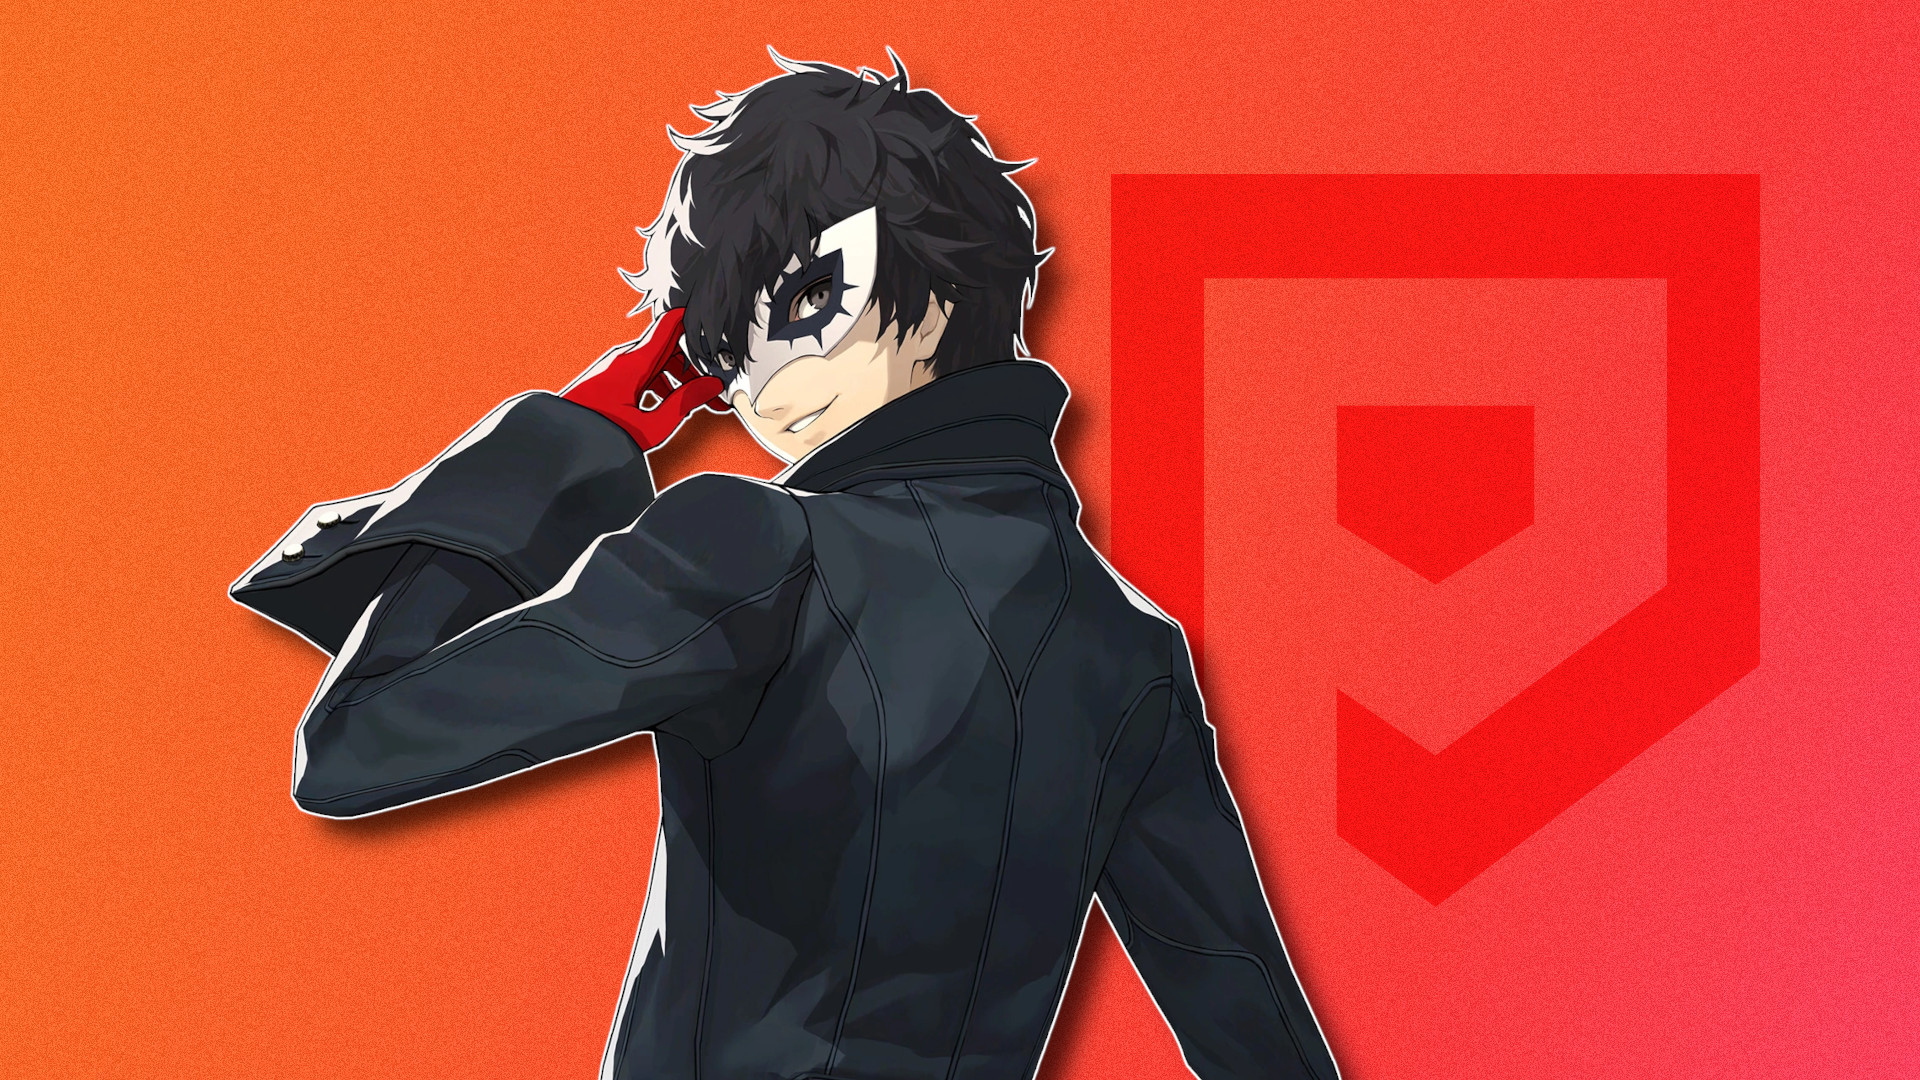 Persona 5 Character Descriptions Posted - News - Anime News Network